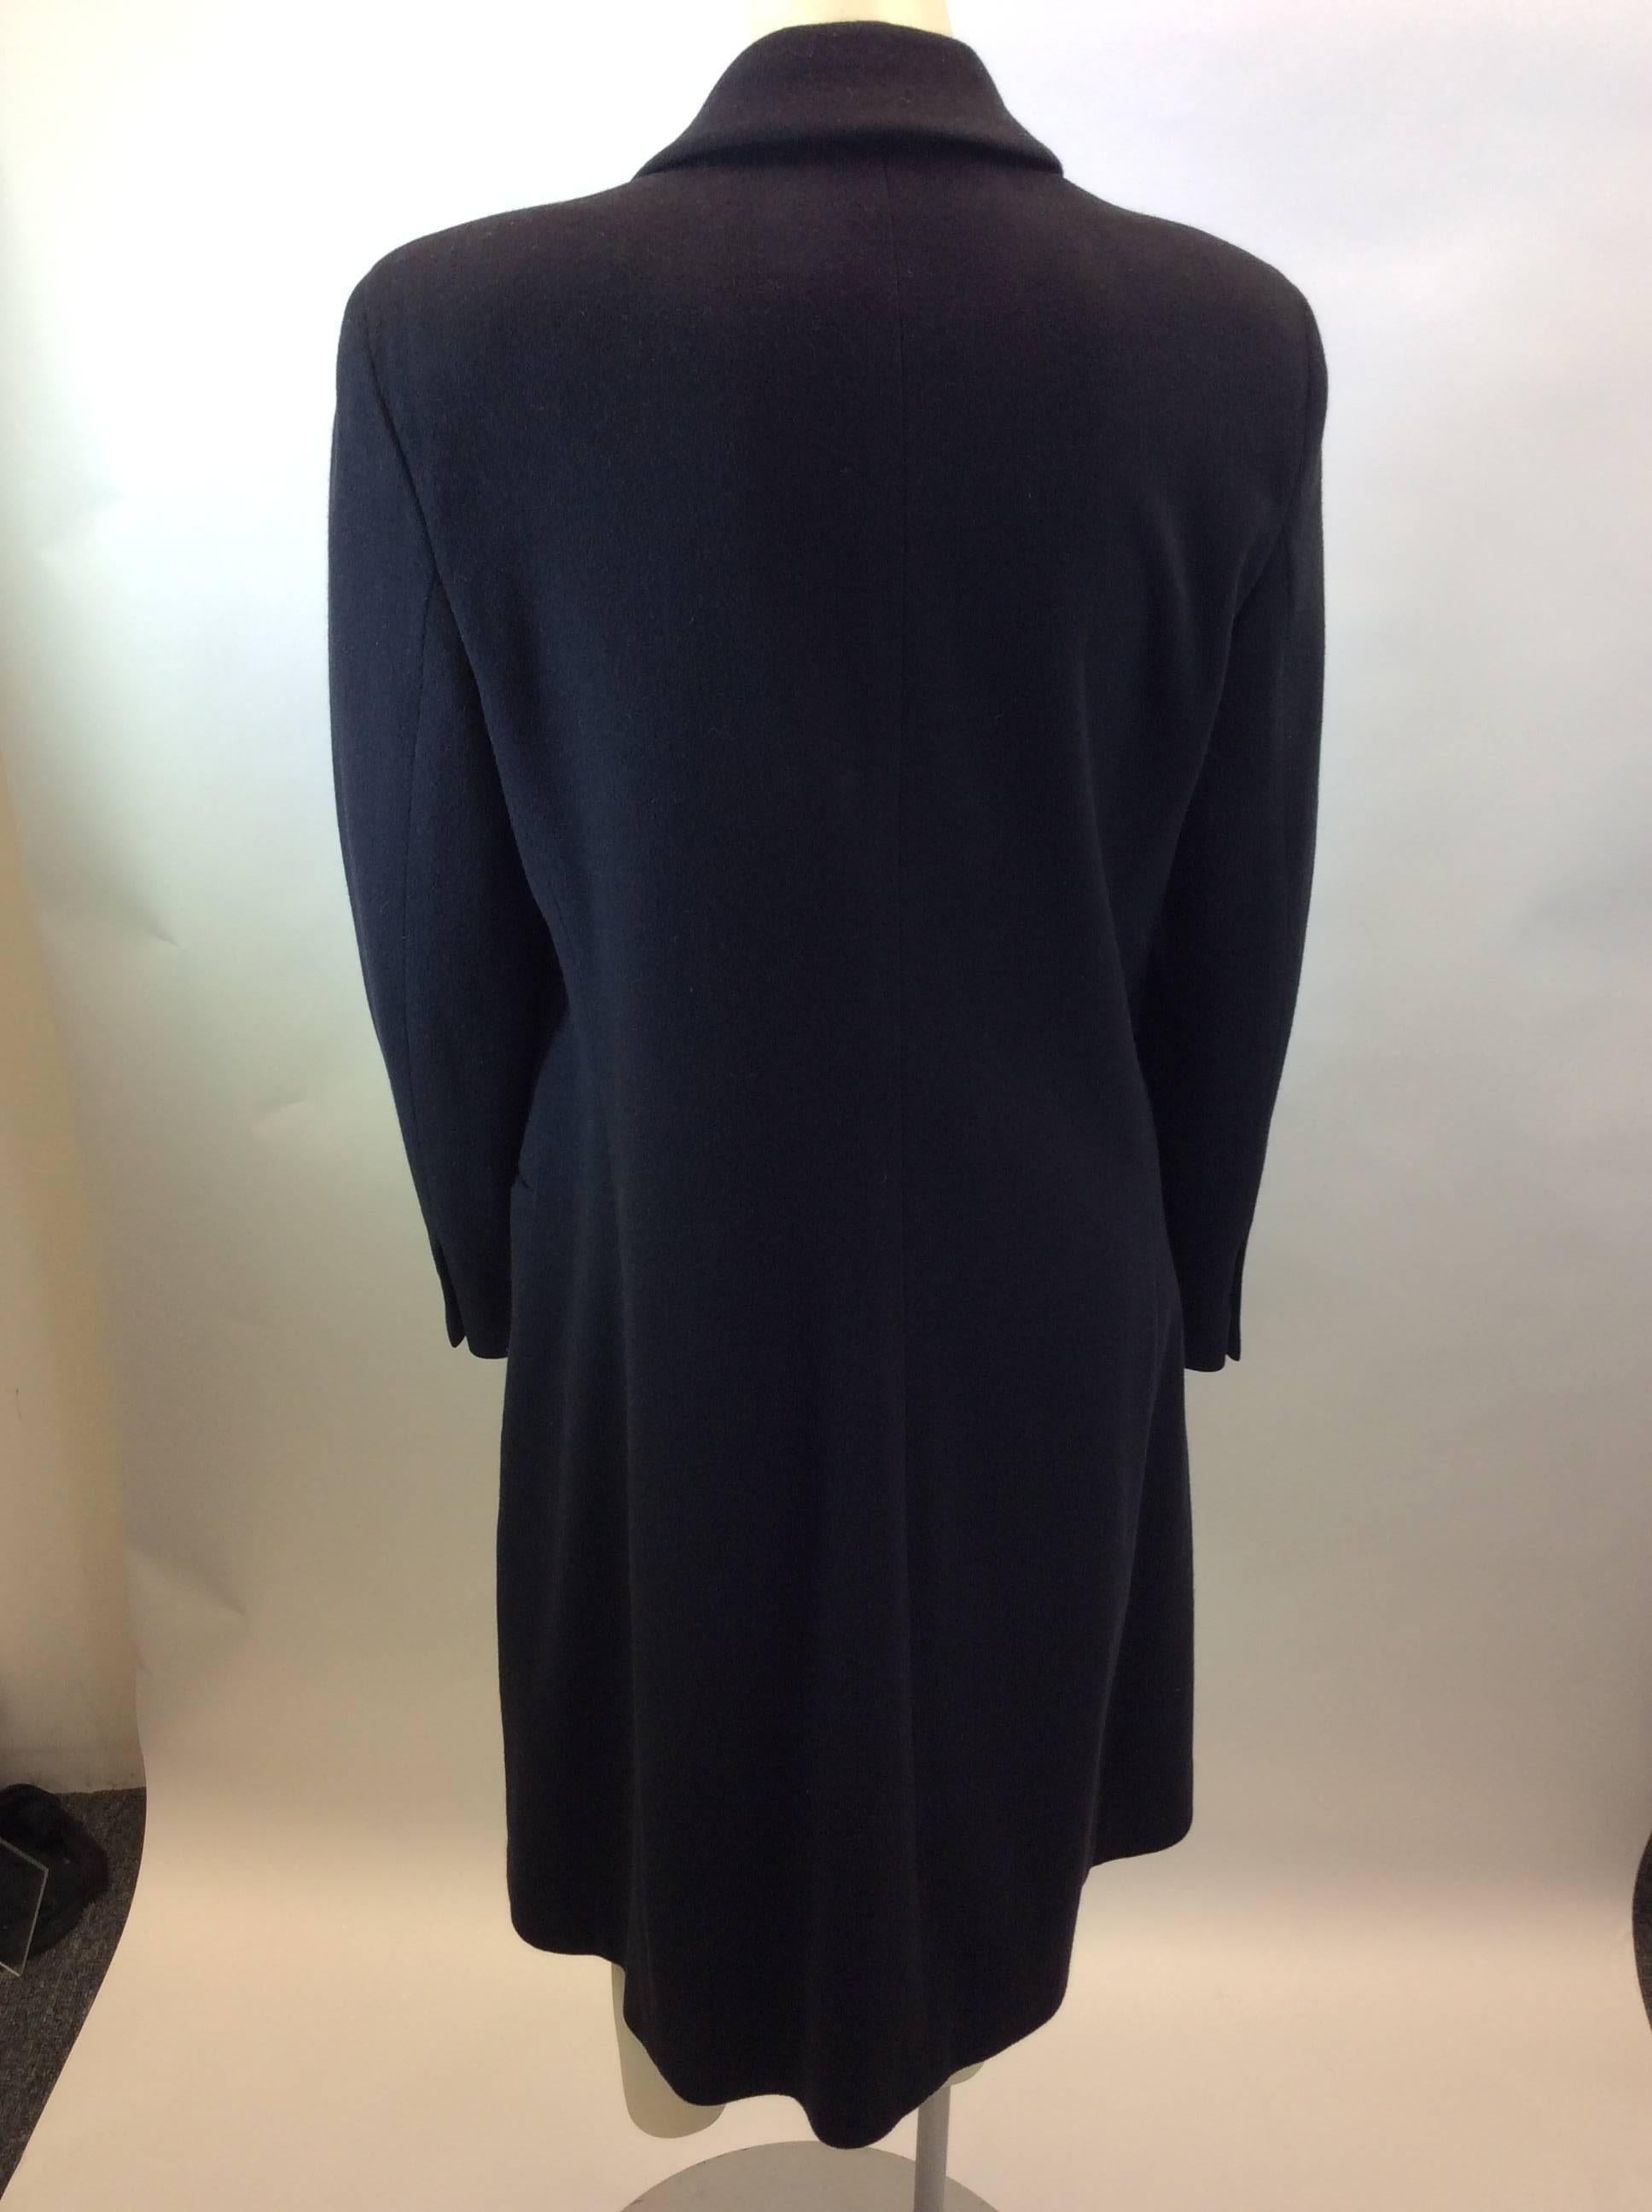 Donna Karan Black Wool Coat In Excellent Condition For Sale In Narberth, PA